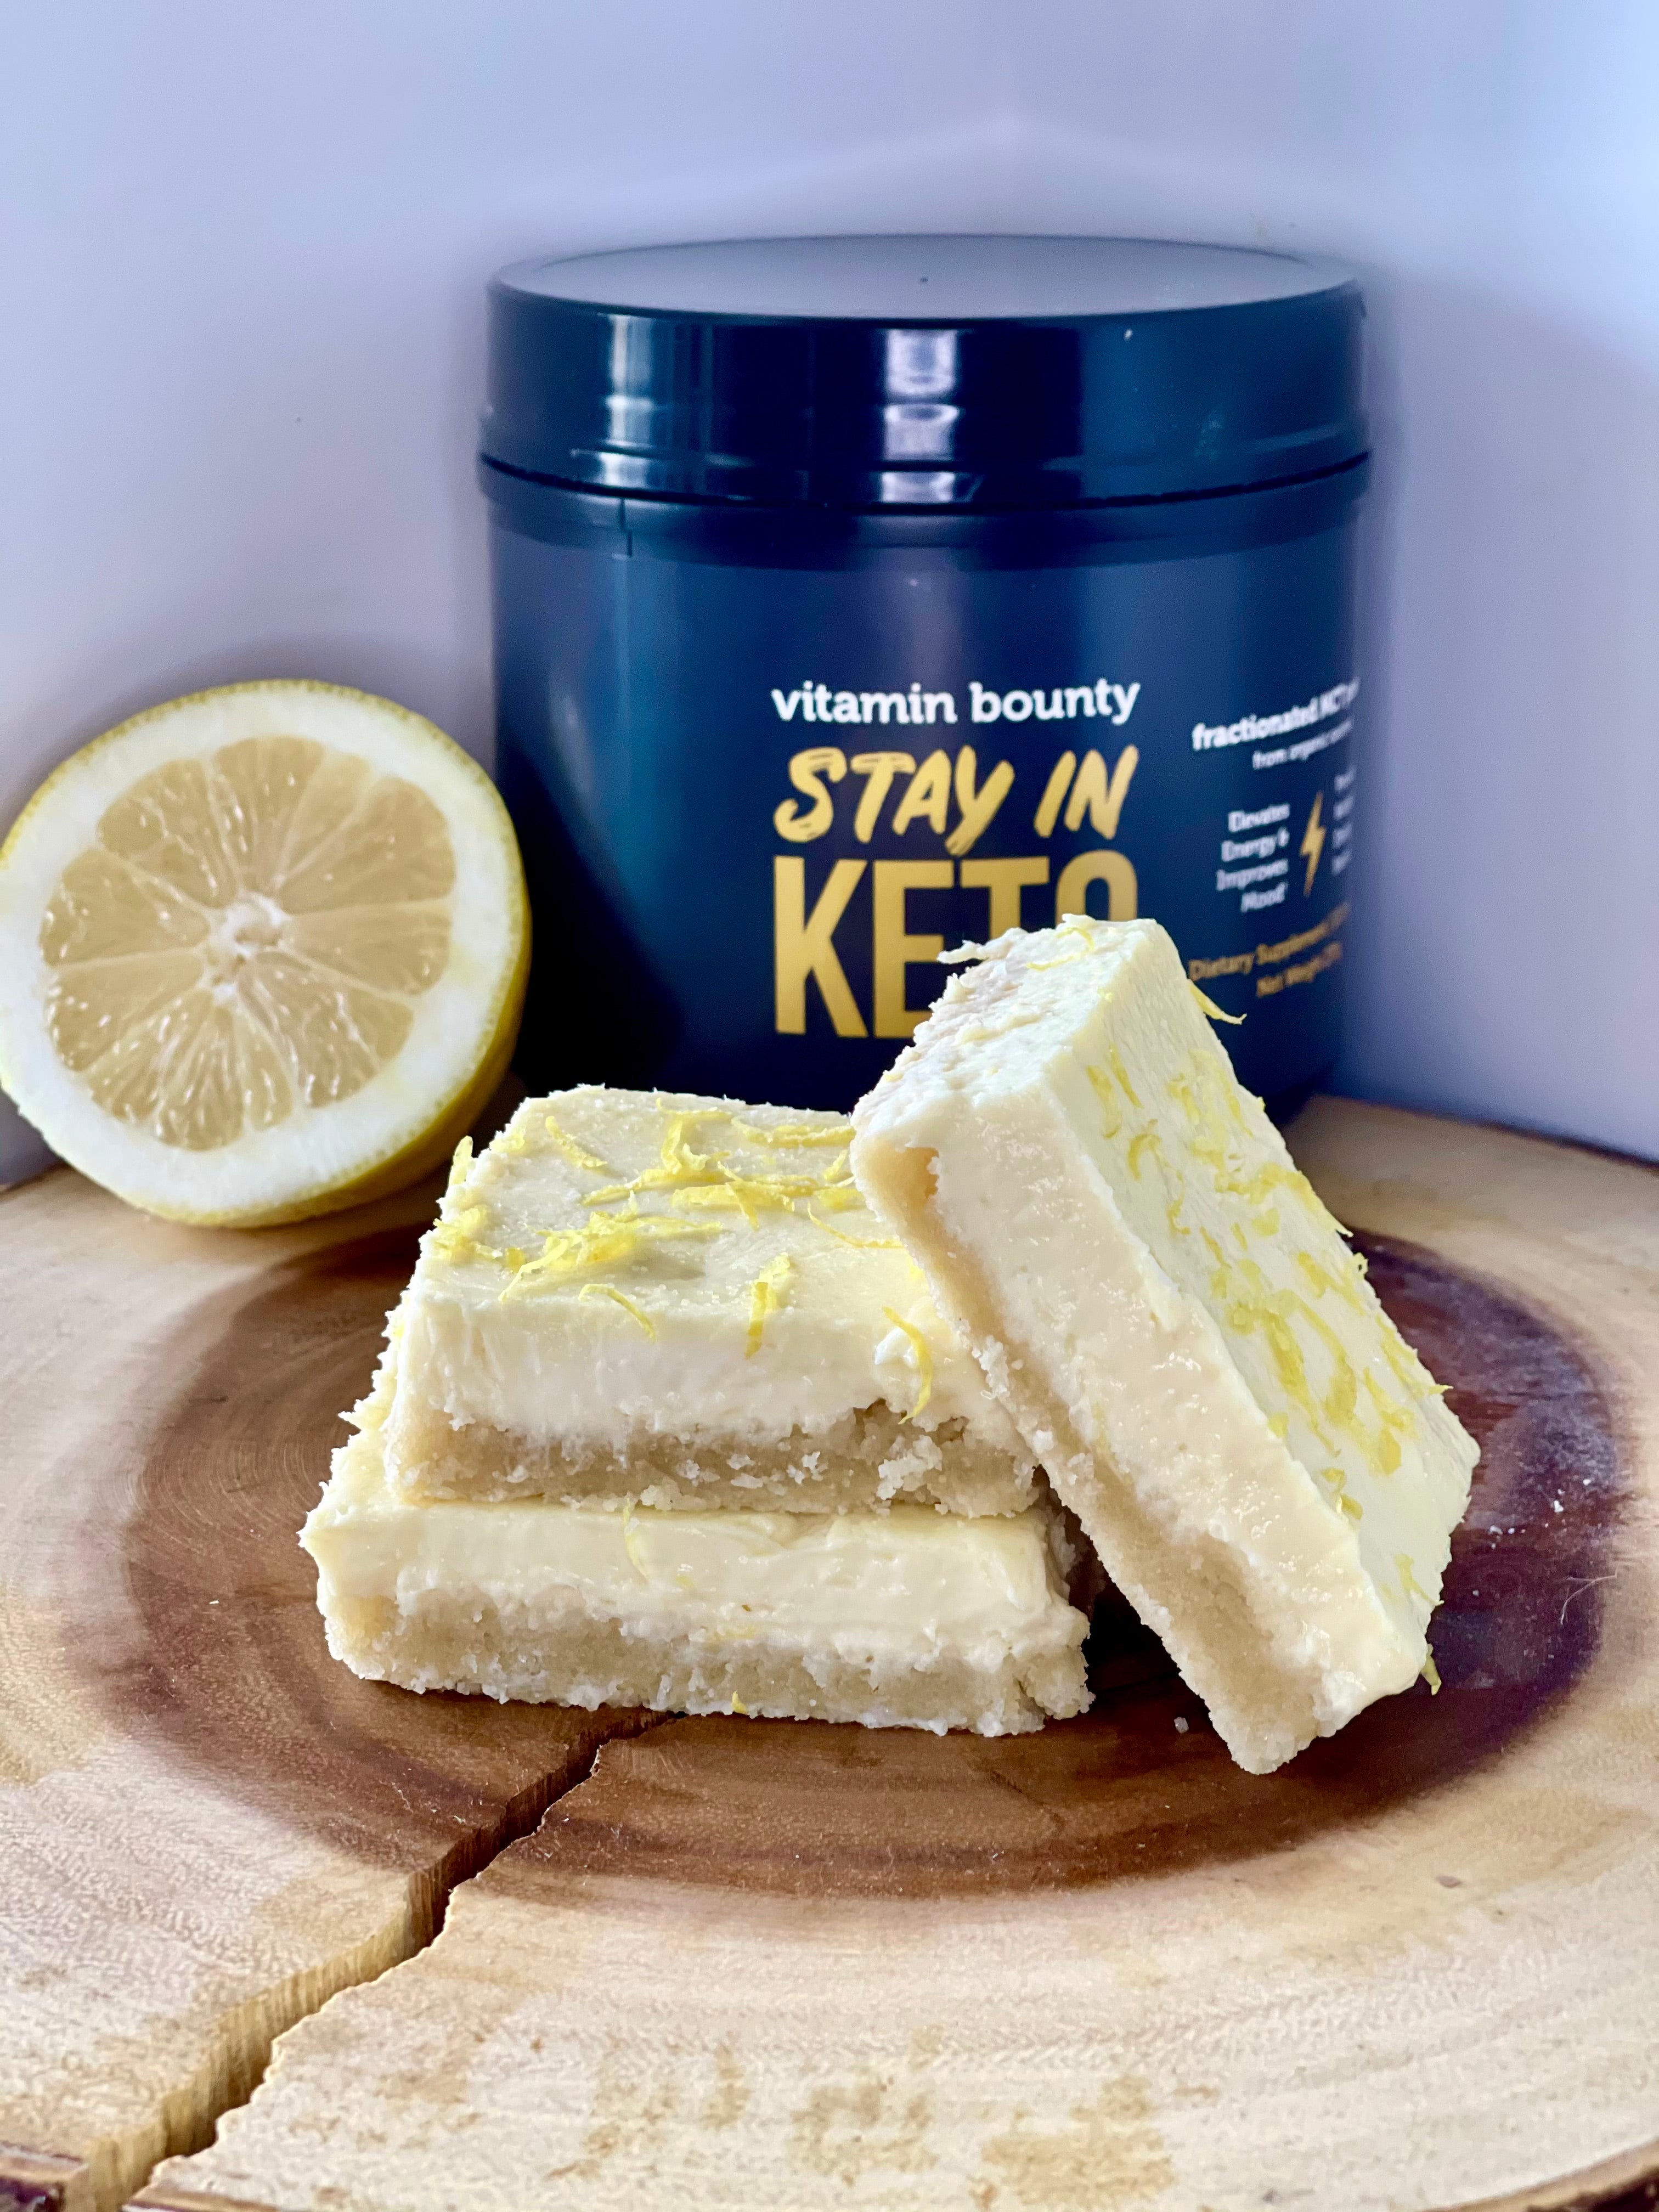 Lemon Cheesecake Bars made with Stay in Keto from Vitamin Bounty